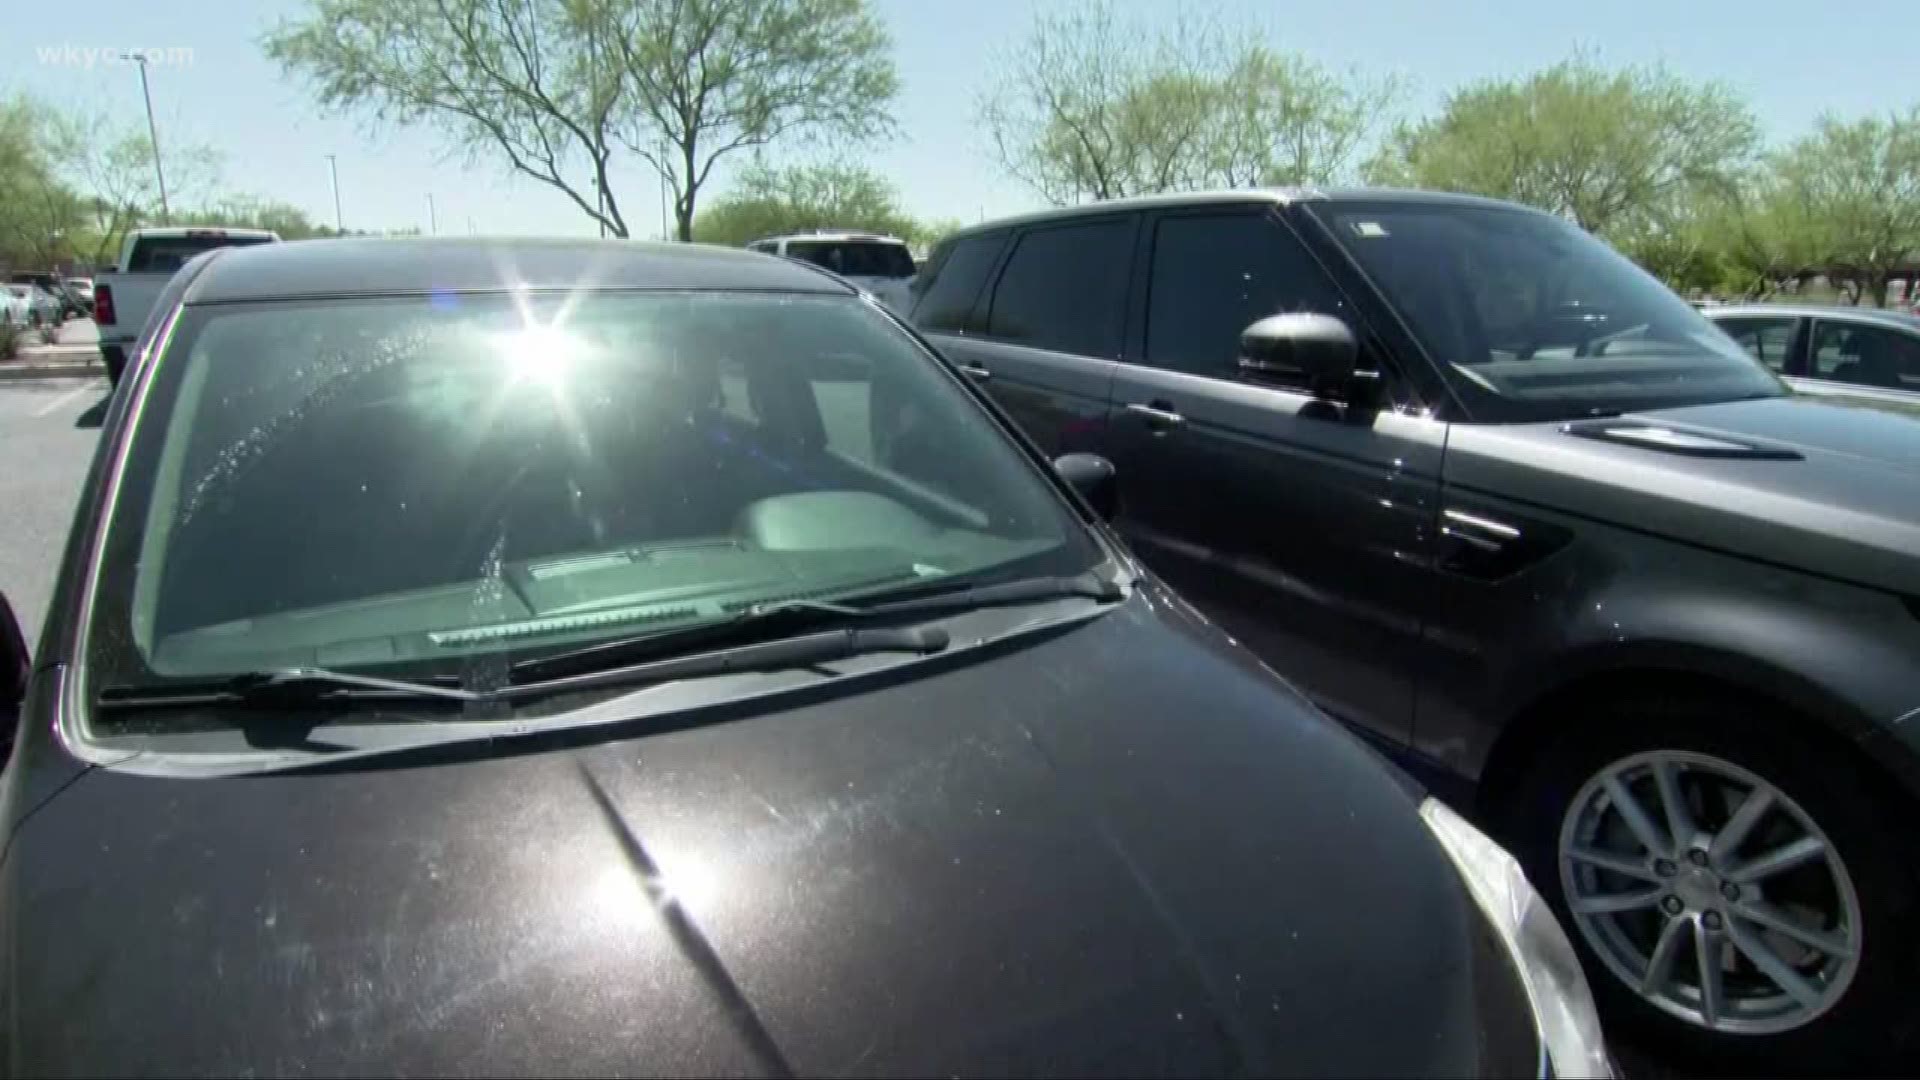 May 22, 2019: According to Tim Ryan's office, the proposal would require the U.S. Department of Transportation to require all vehicles to be equipped with a system to alert a driver if a passenger is still in the back seat when the car is turned off. Officials say 38 American children on average die every year from being left in a hot vehicle, for a total of more than 800 since 1990.